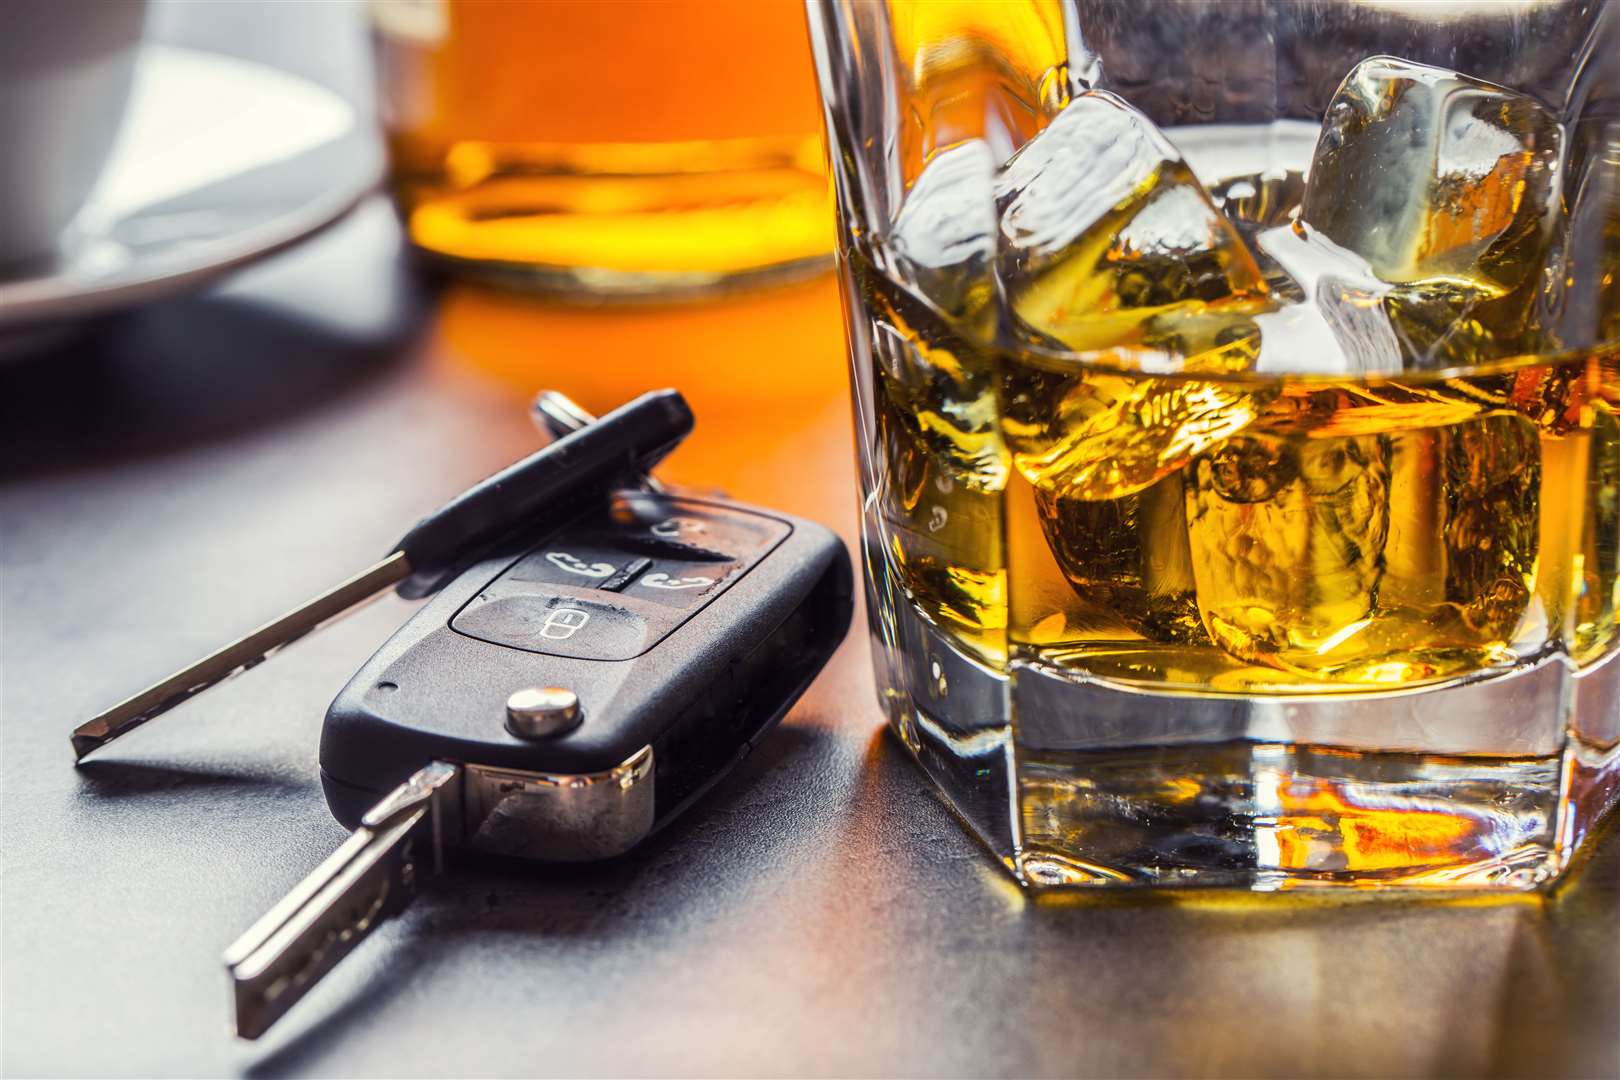 Police are urging people to leave the car keys at home when they are out having a drink.